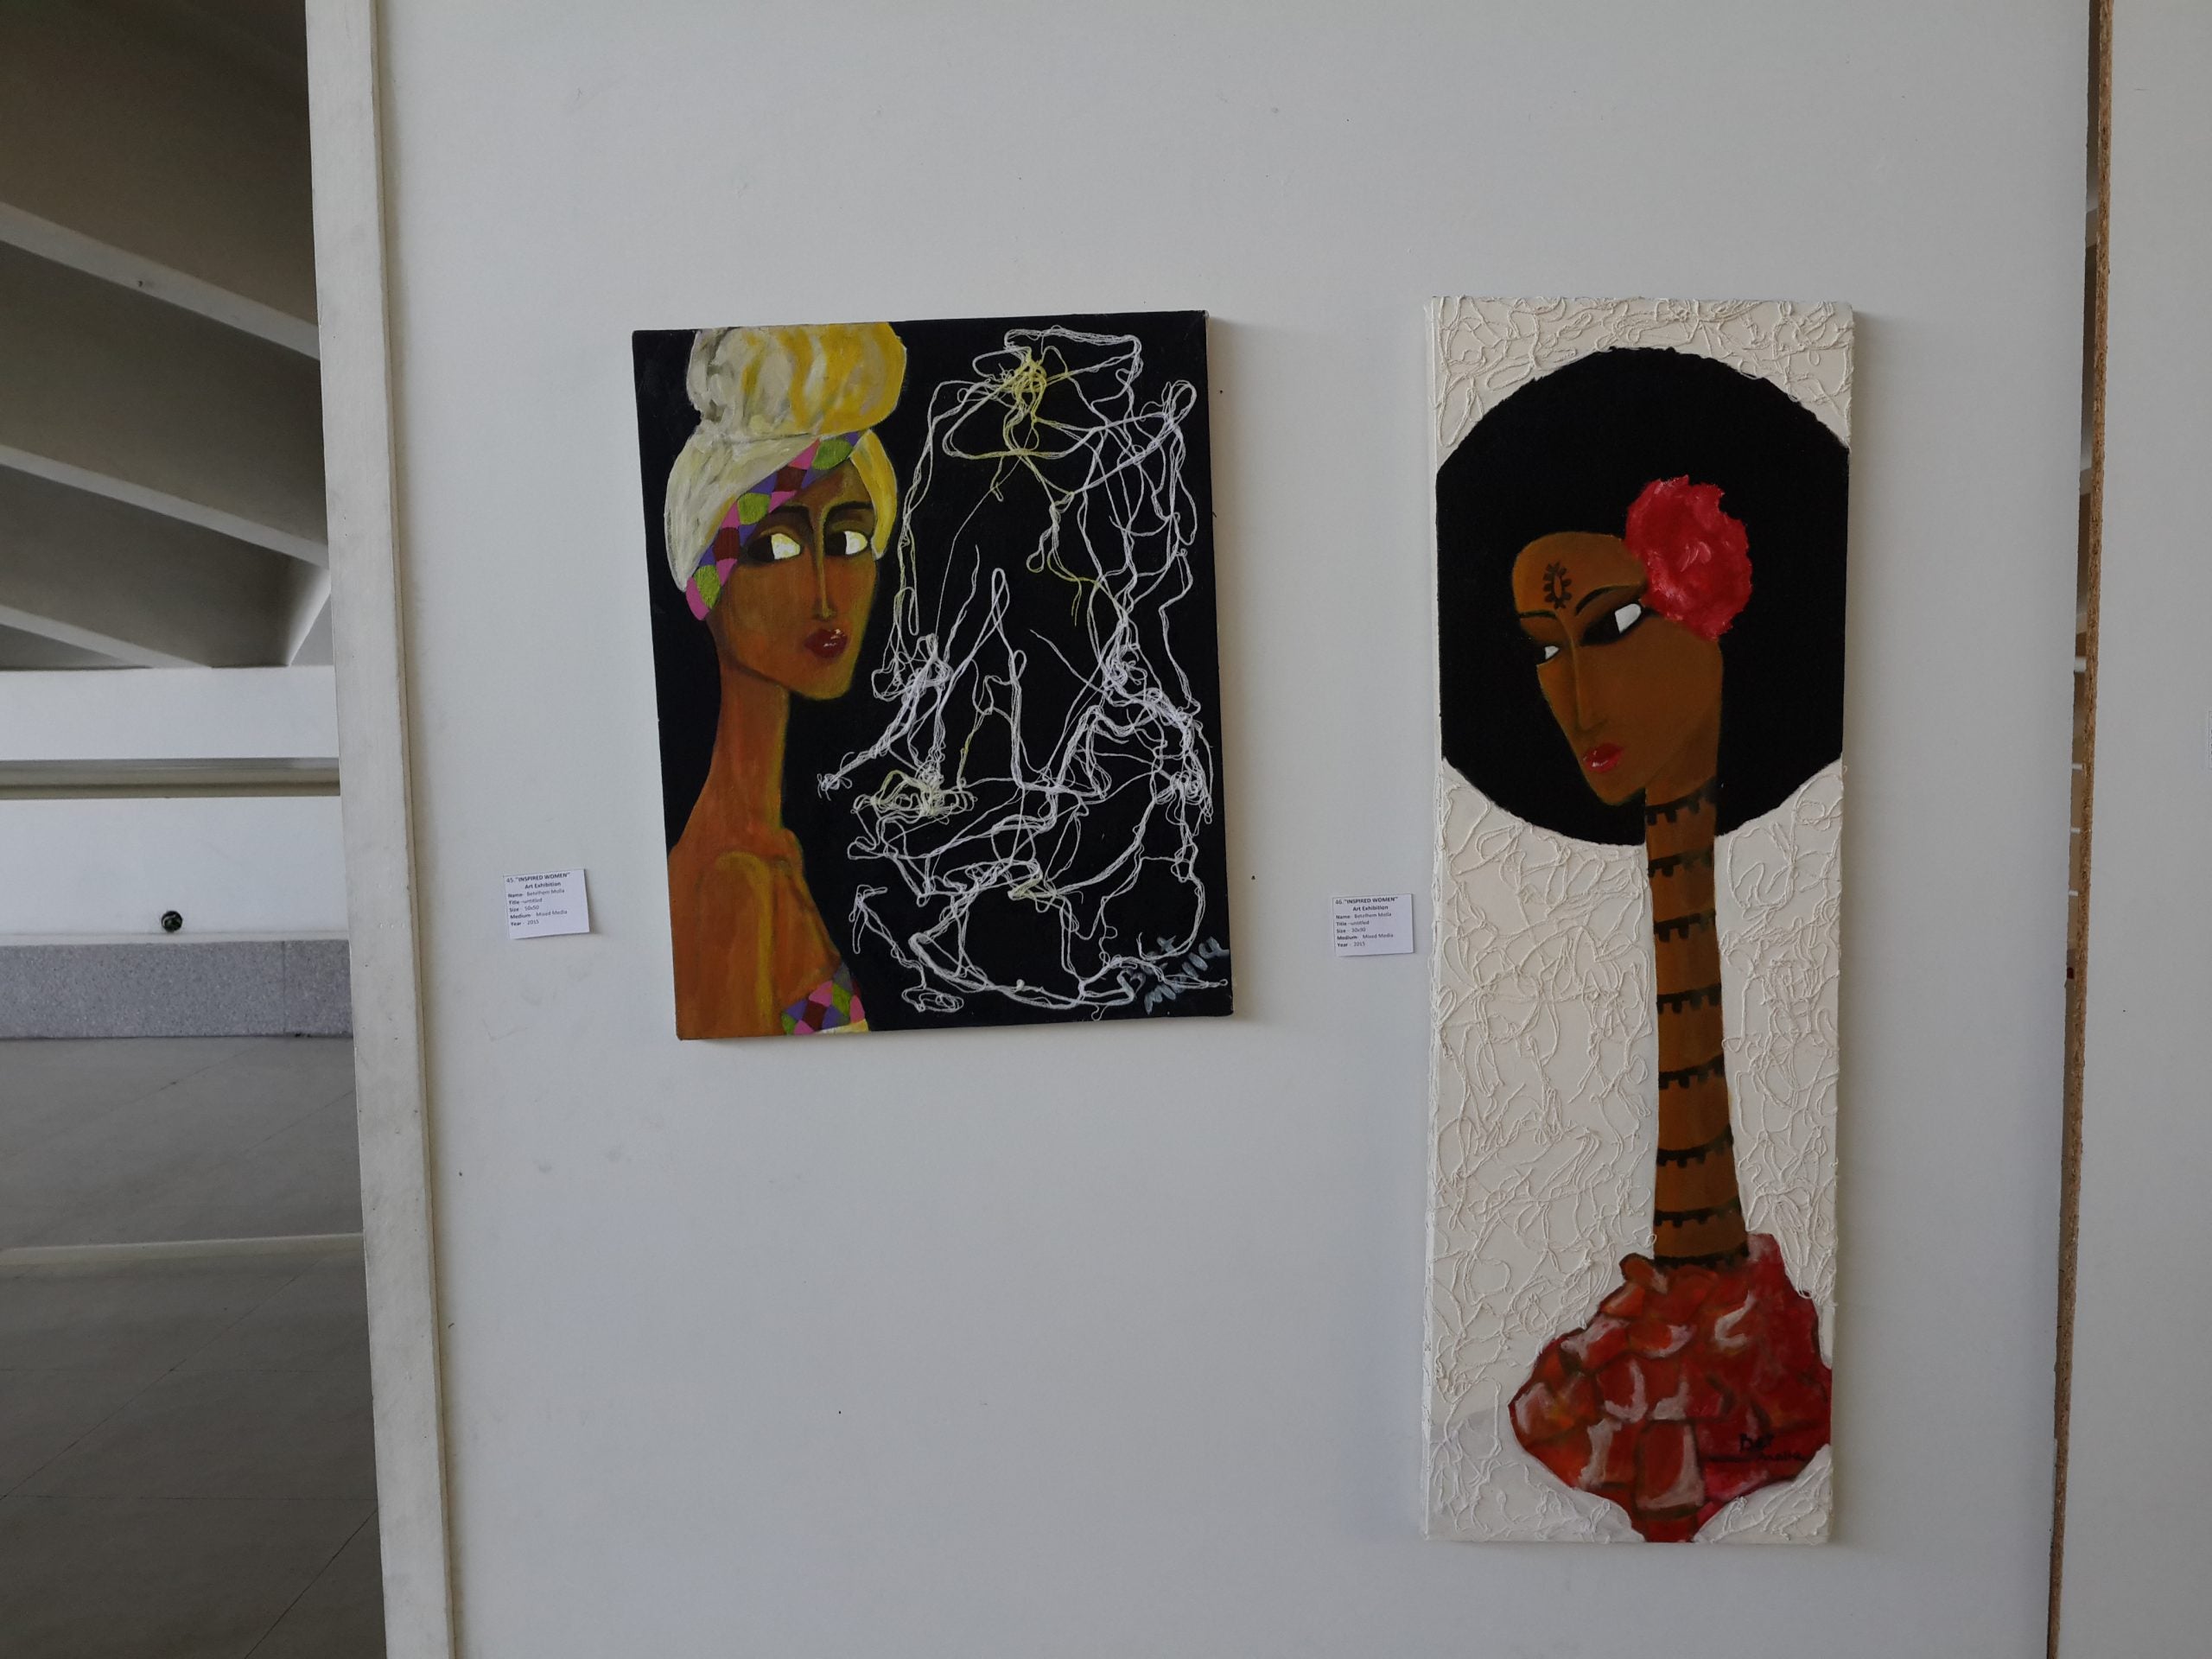 Two paintings featured in the gallery